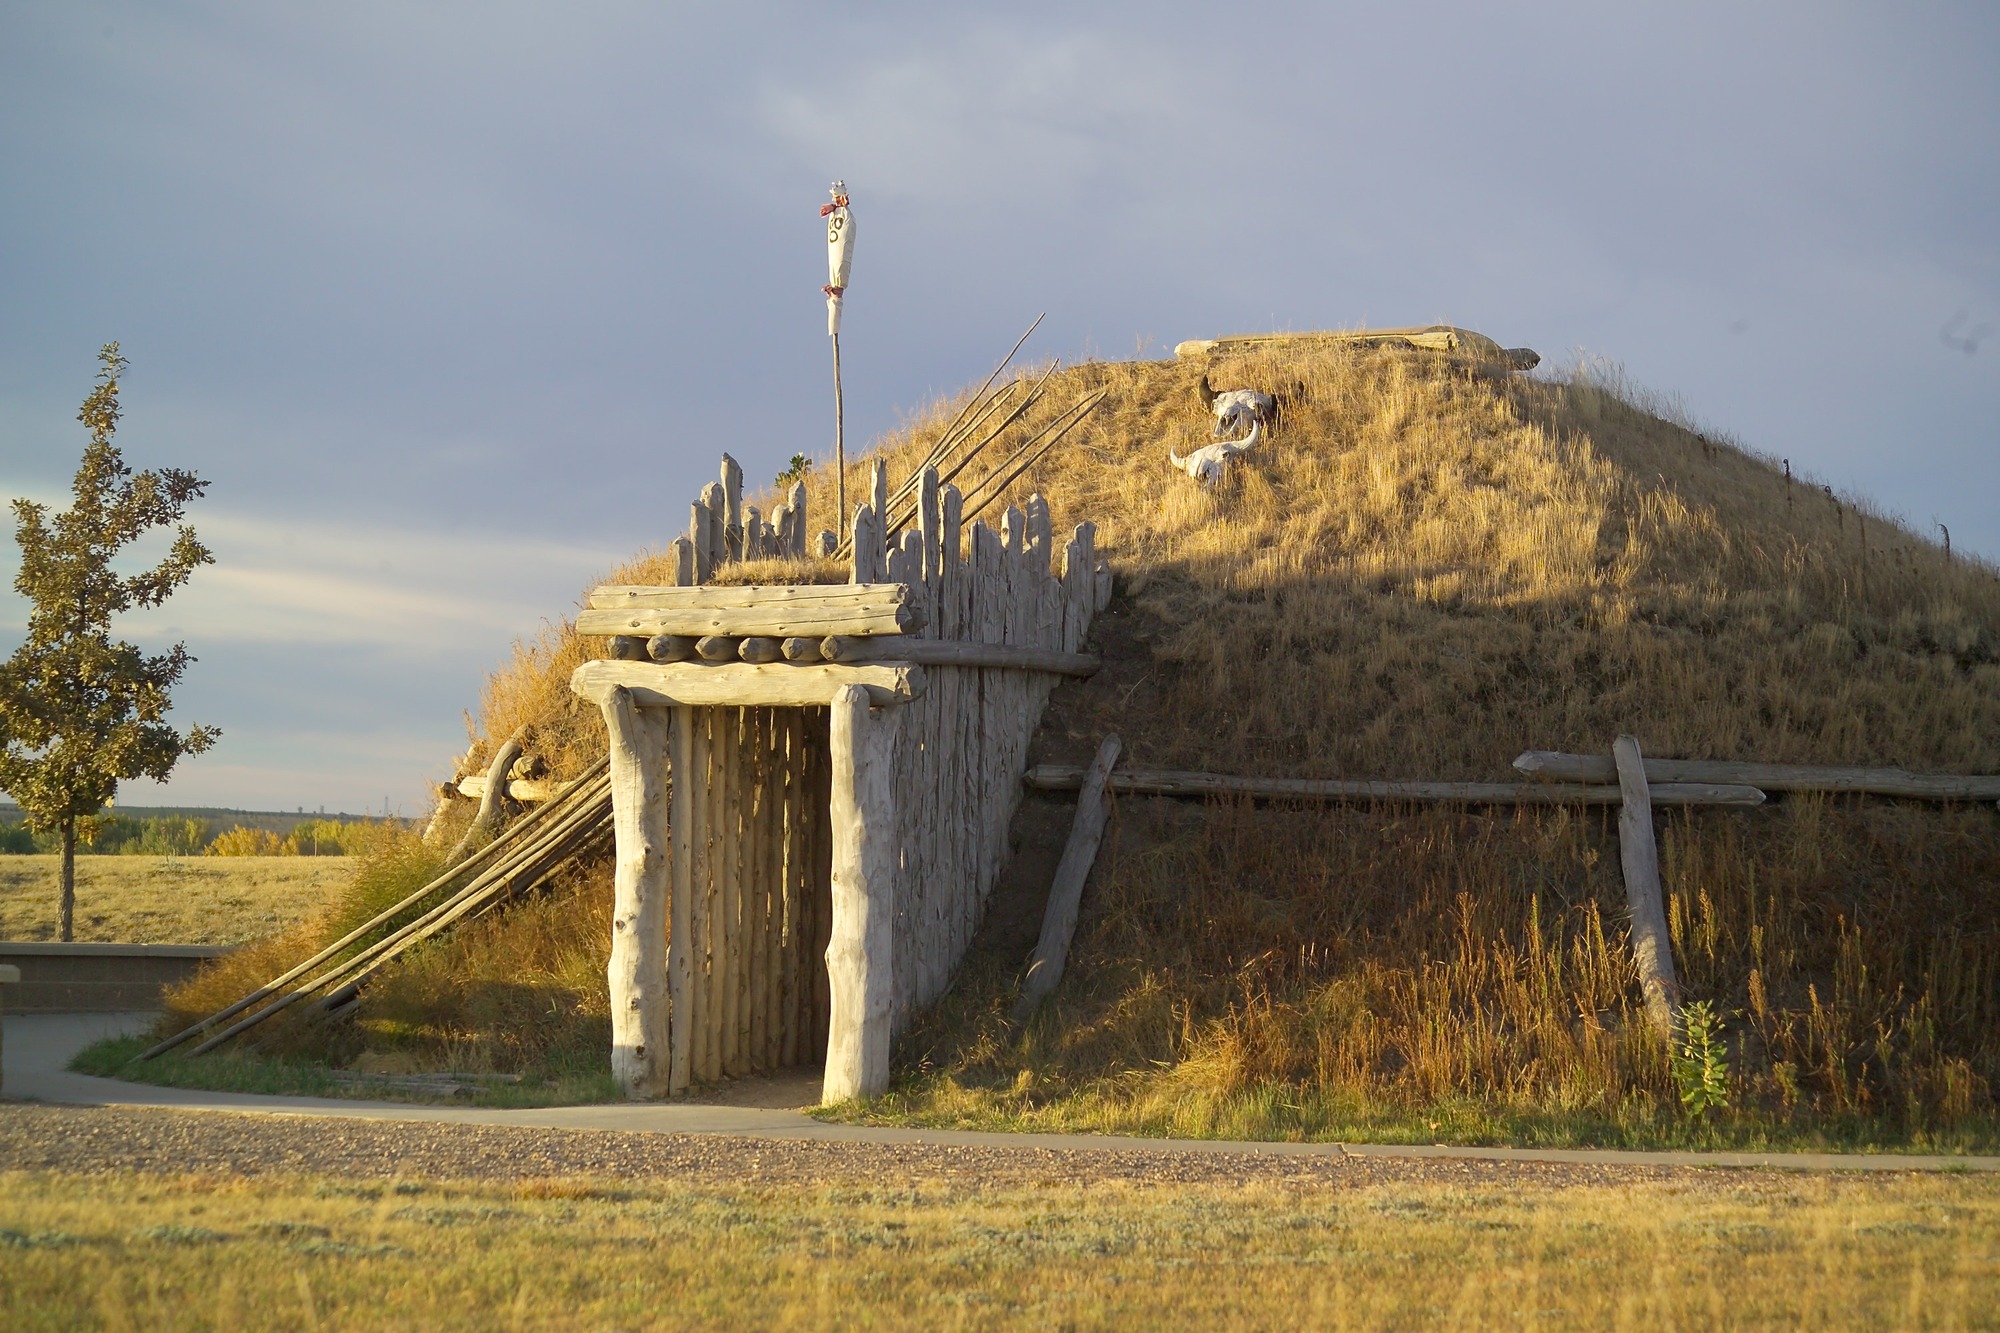 Life-sized earthlodge home with door facing east composed of wooden posts, dirt, and dried grass. 